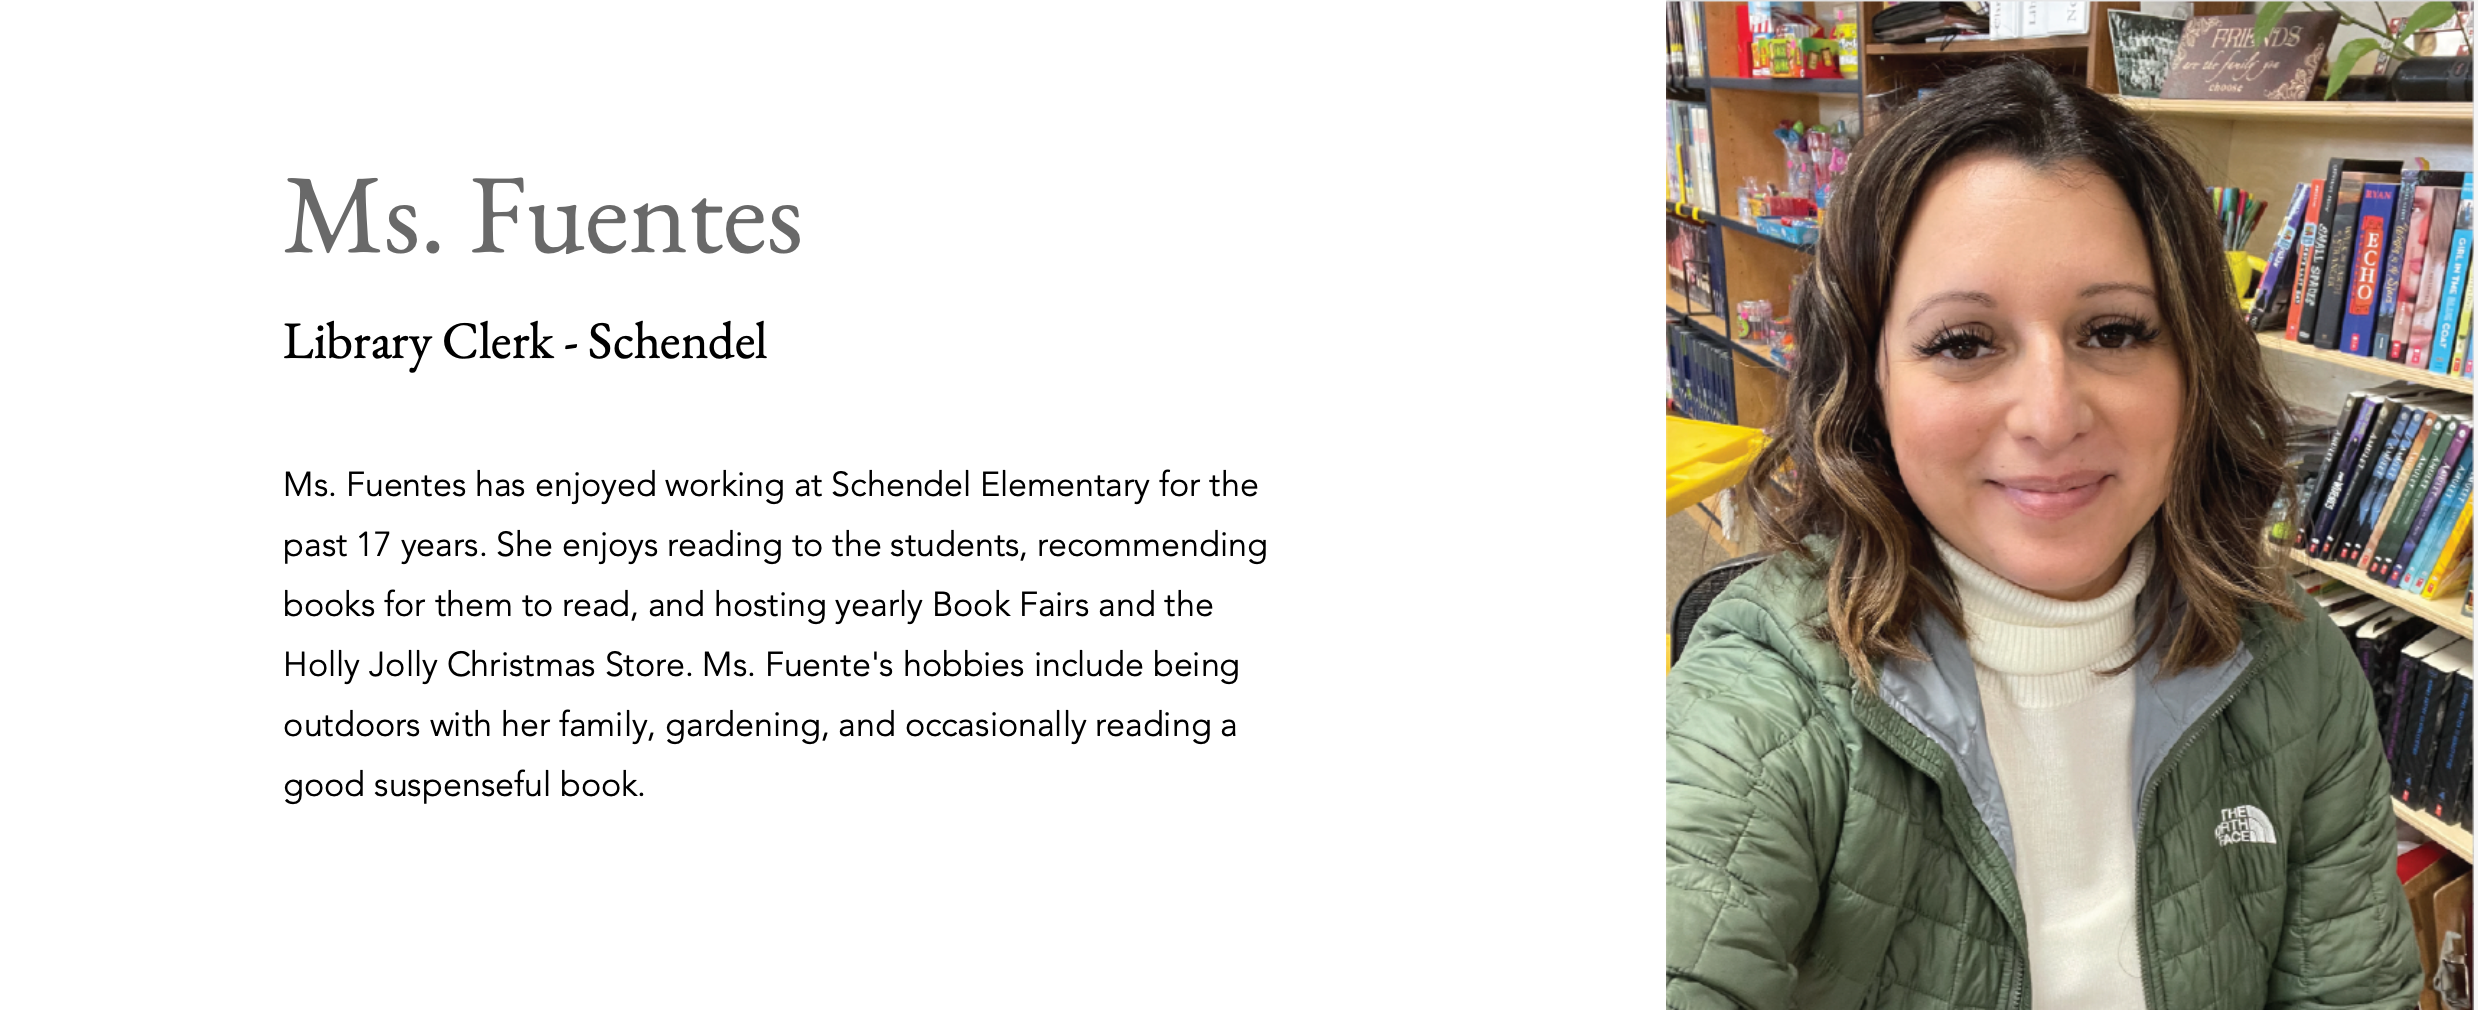 Ms. Fuentes Library Clerk - Schendel Ms. Fuentes has enjoyed working at Schendel Elementary for the past 17 years. She enjoys reading to the students, recommending books for them to read, and hosting yearly Book Fairs and the Holly Jolly Christmas Store. Ms. Fuente's hobbies include being outdoors with her family, gardening, and occasionally reading a good suspenseful book.